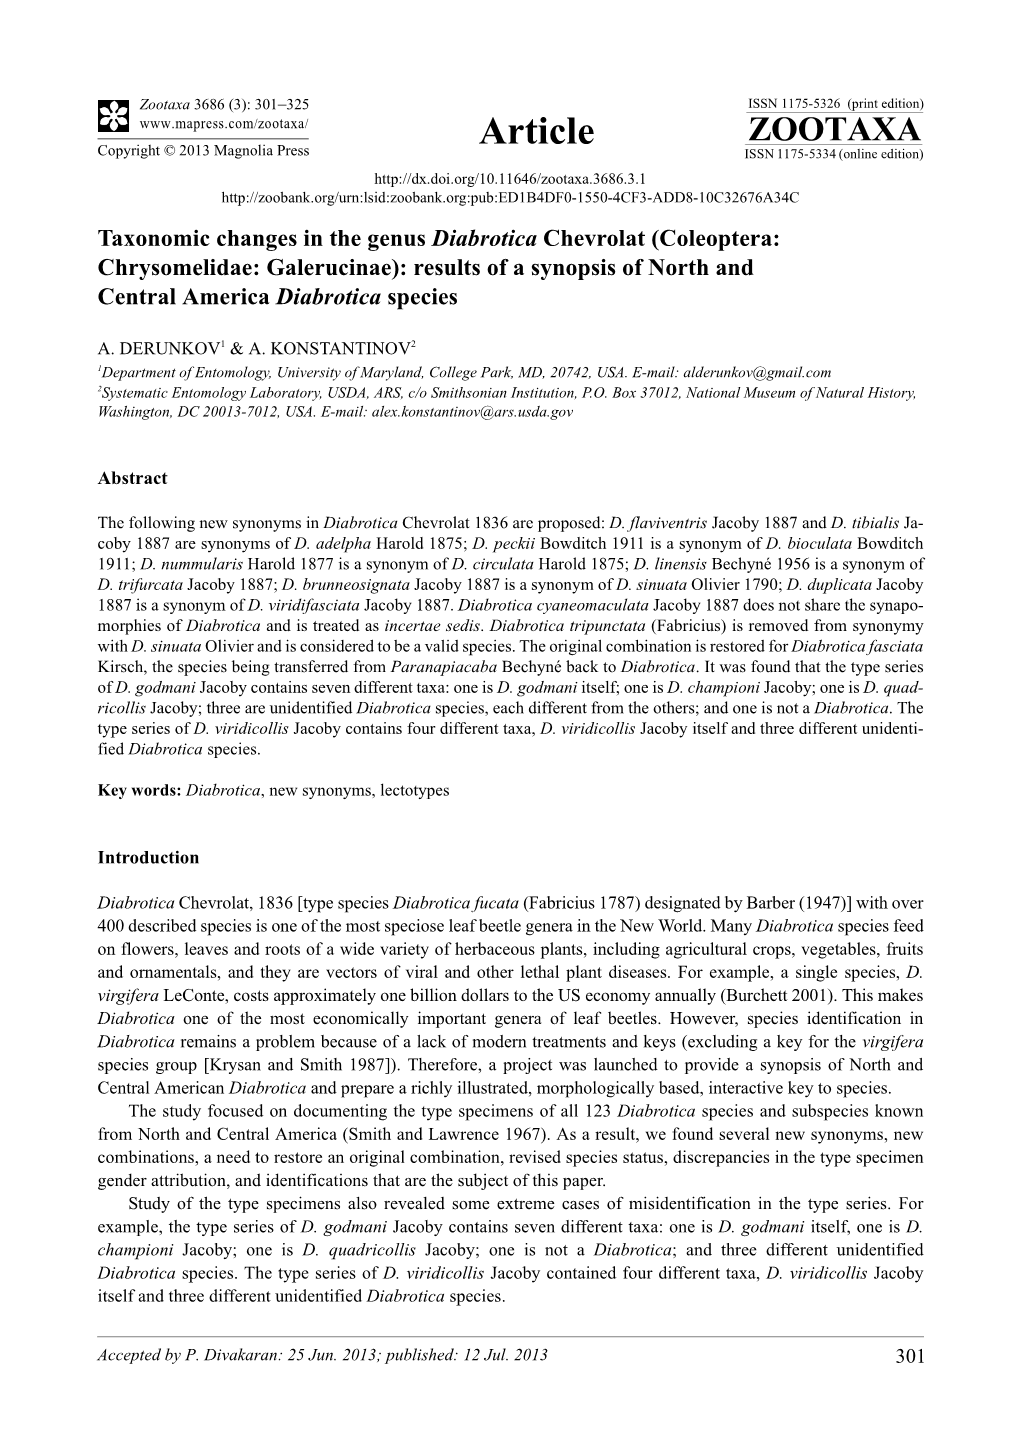 Taxonomic Changes in the Genus Diabrotica Chevrolat (Coleoptera: Chrysomelidae: Galerucinae): Results of a Synopsis of North and Central America Diabrotica Species